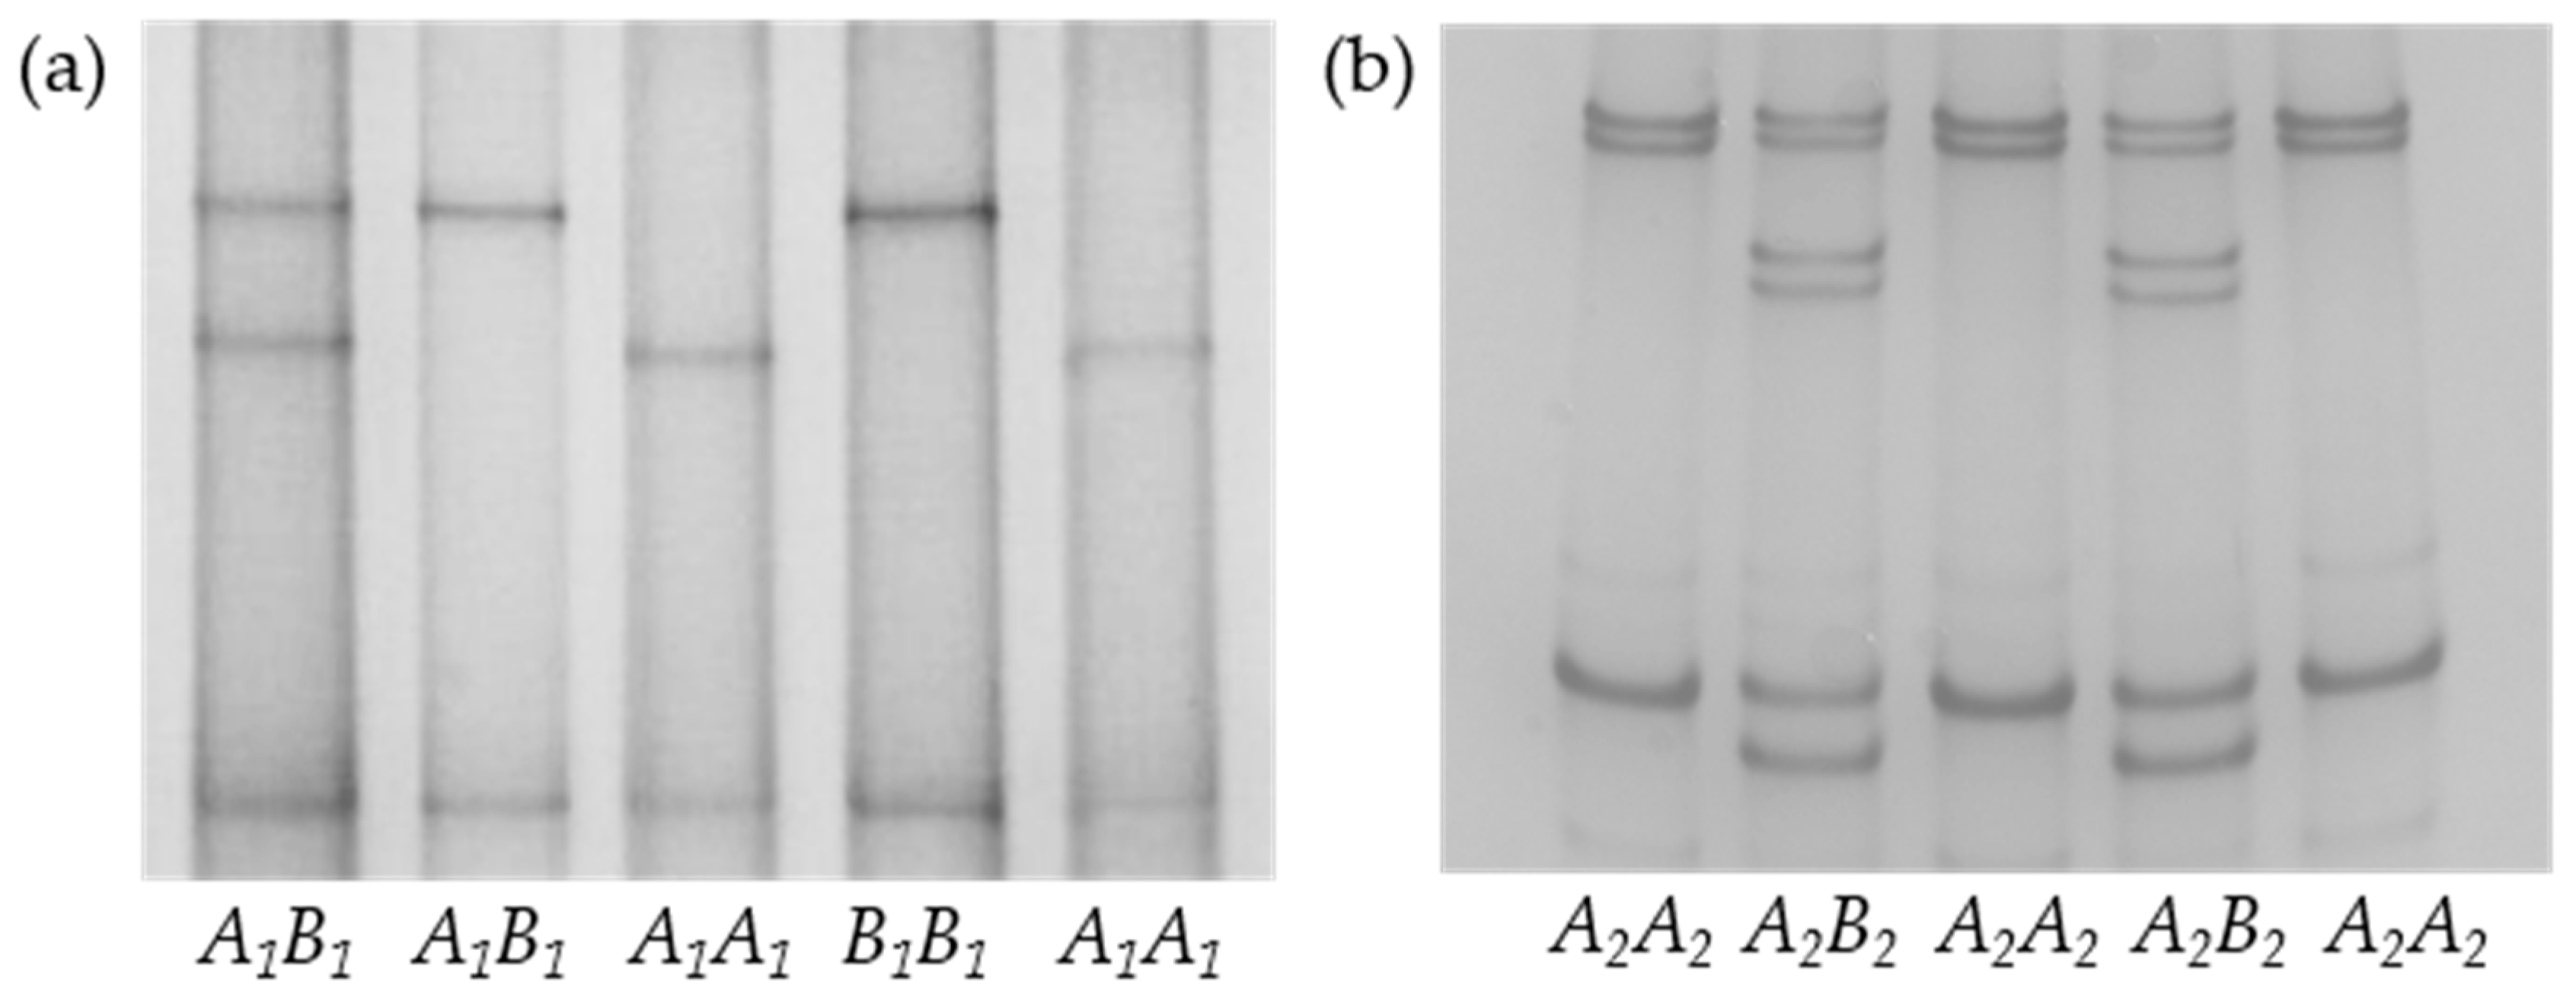 Animals | Free Full-Text | Variation in the Fatty Acid Synthase Gene (FASN) Its Association with Milk Traits in Gannan Yaks | HTML